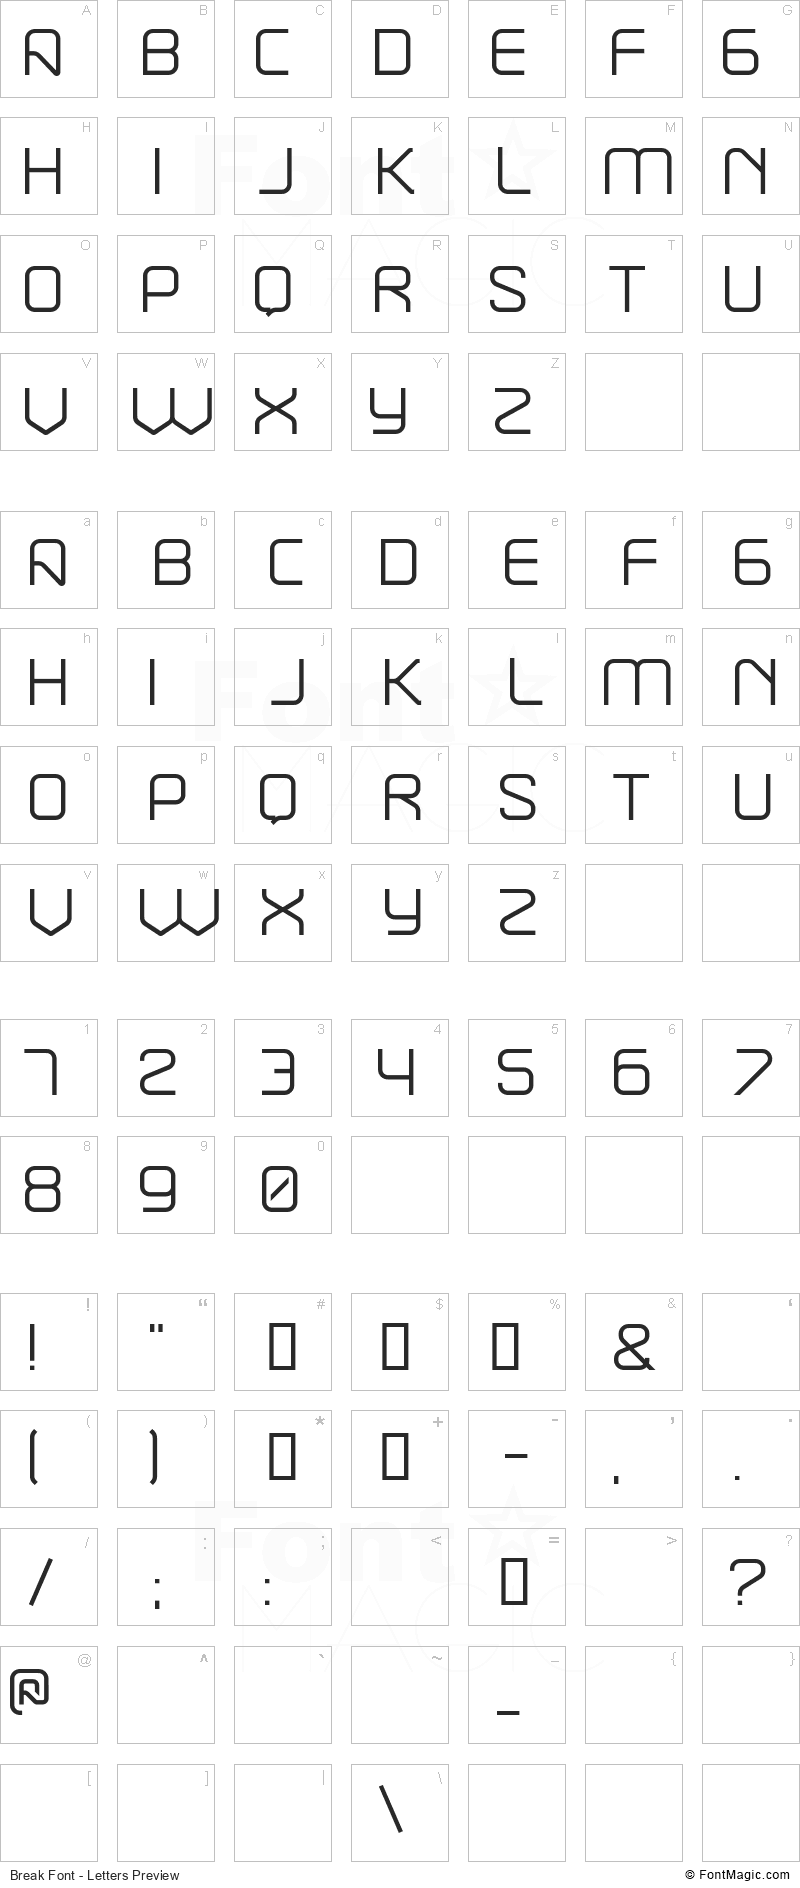 Break Font - All Latters Preview Chart